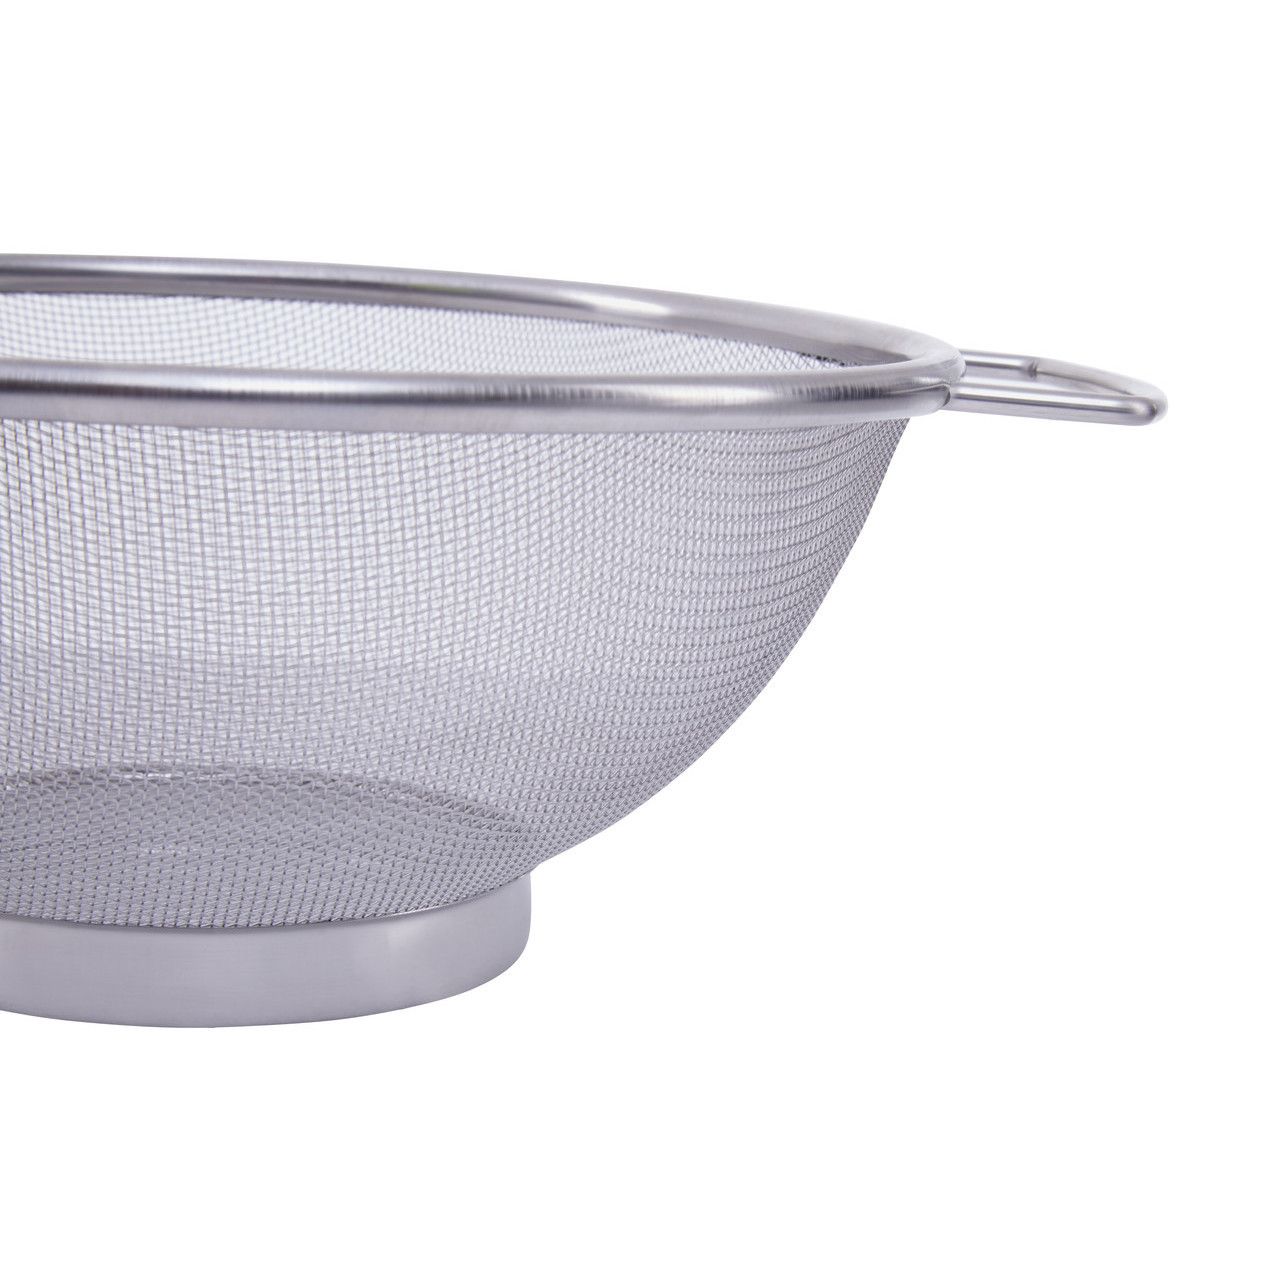 Stainless Steel Wire Mesh Sieve with Double Handle 20cm